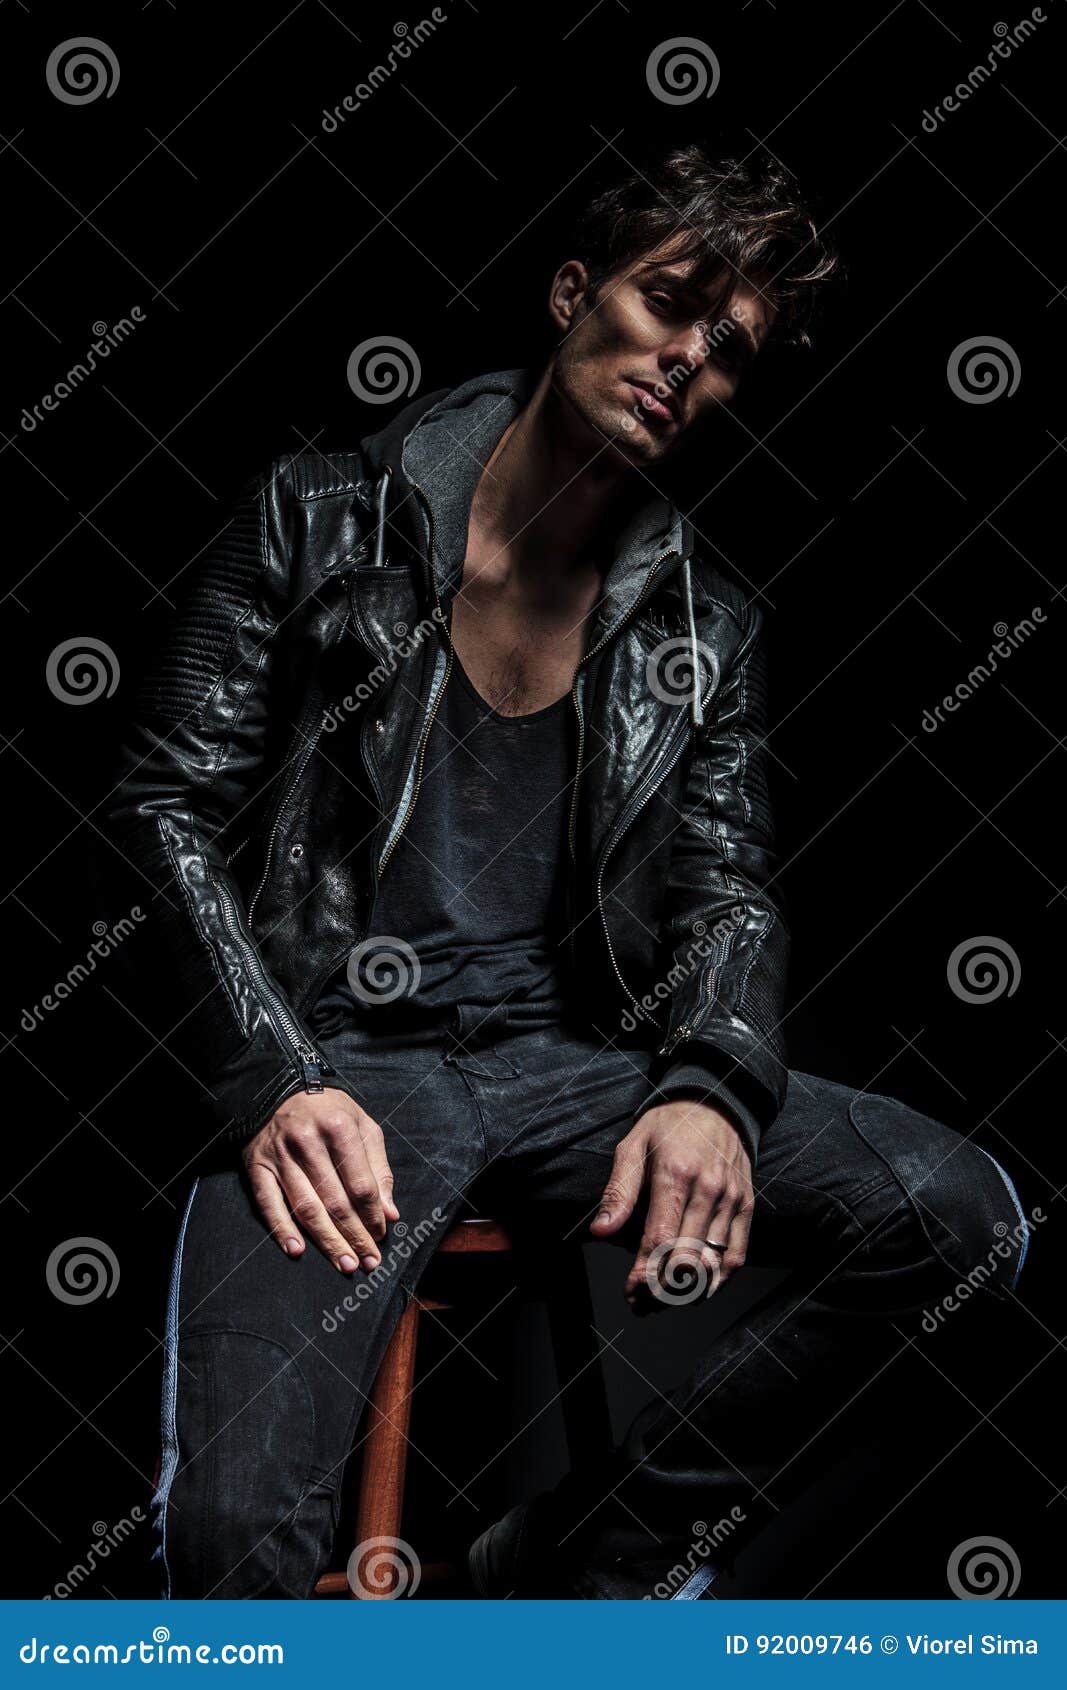 Arrogant Man in Leather Jacket Looking Down You Stock Photo - Image of ...